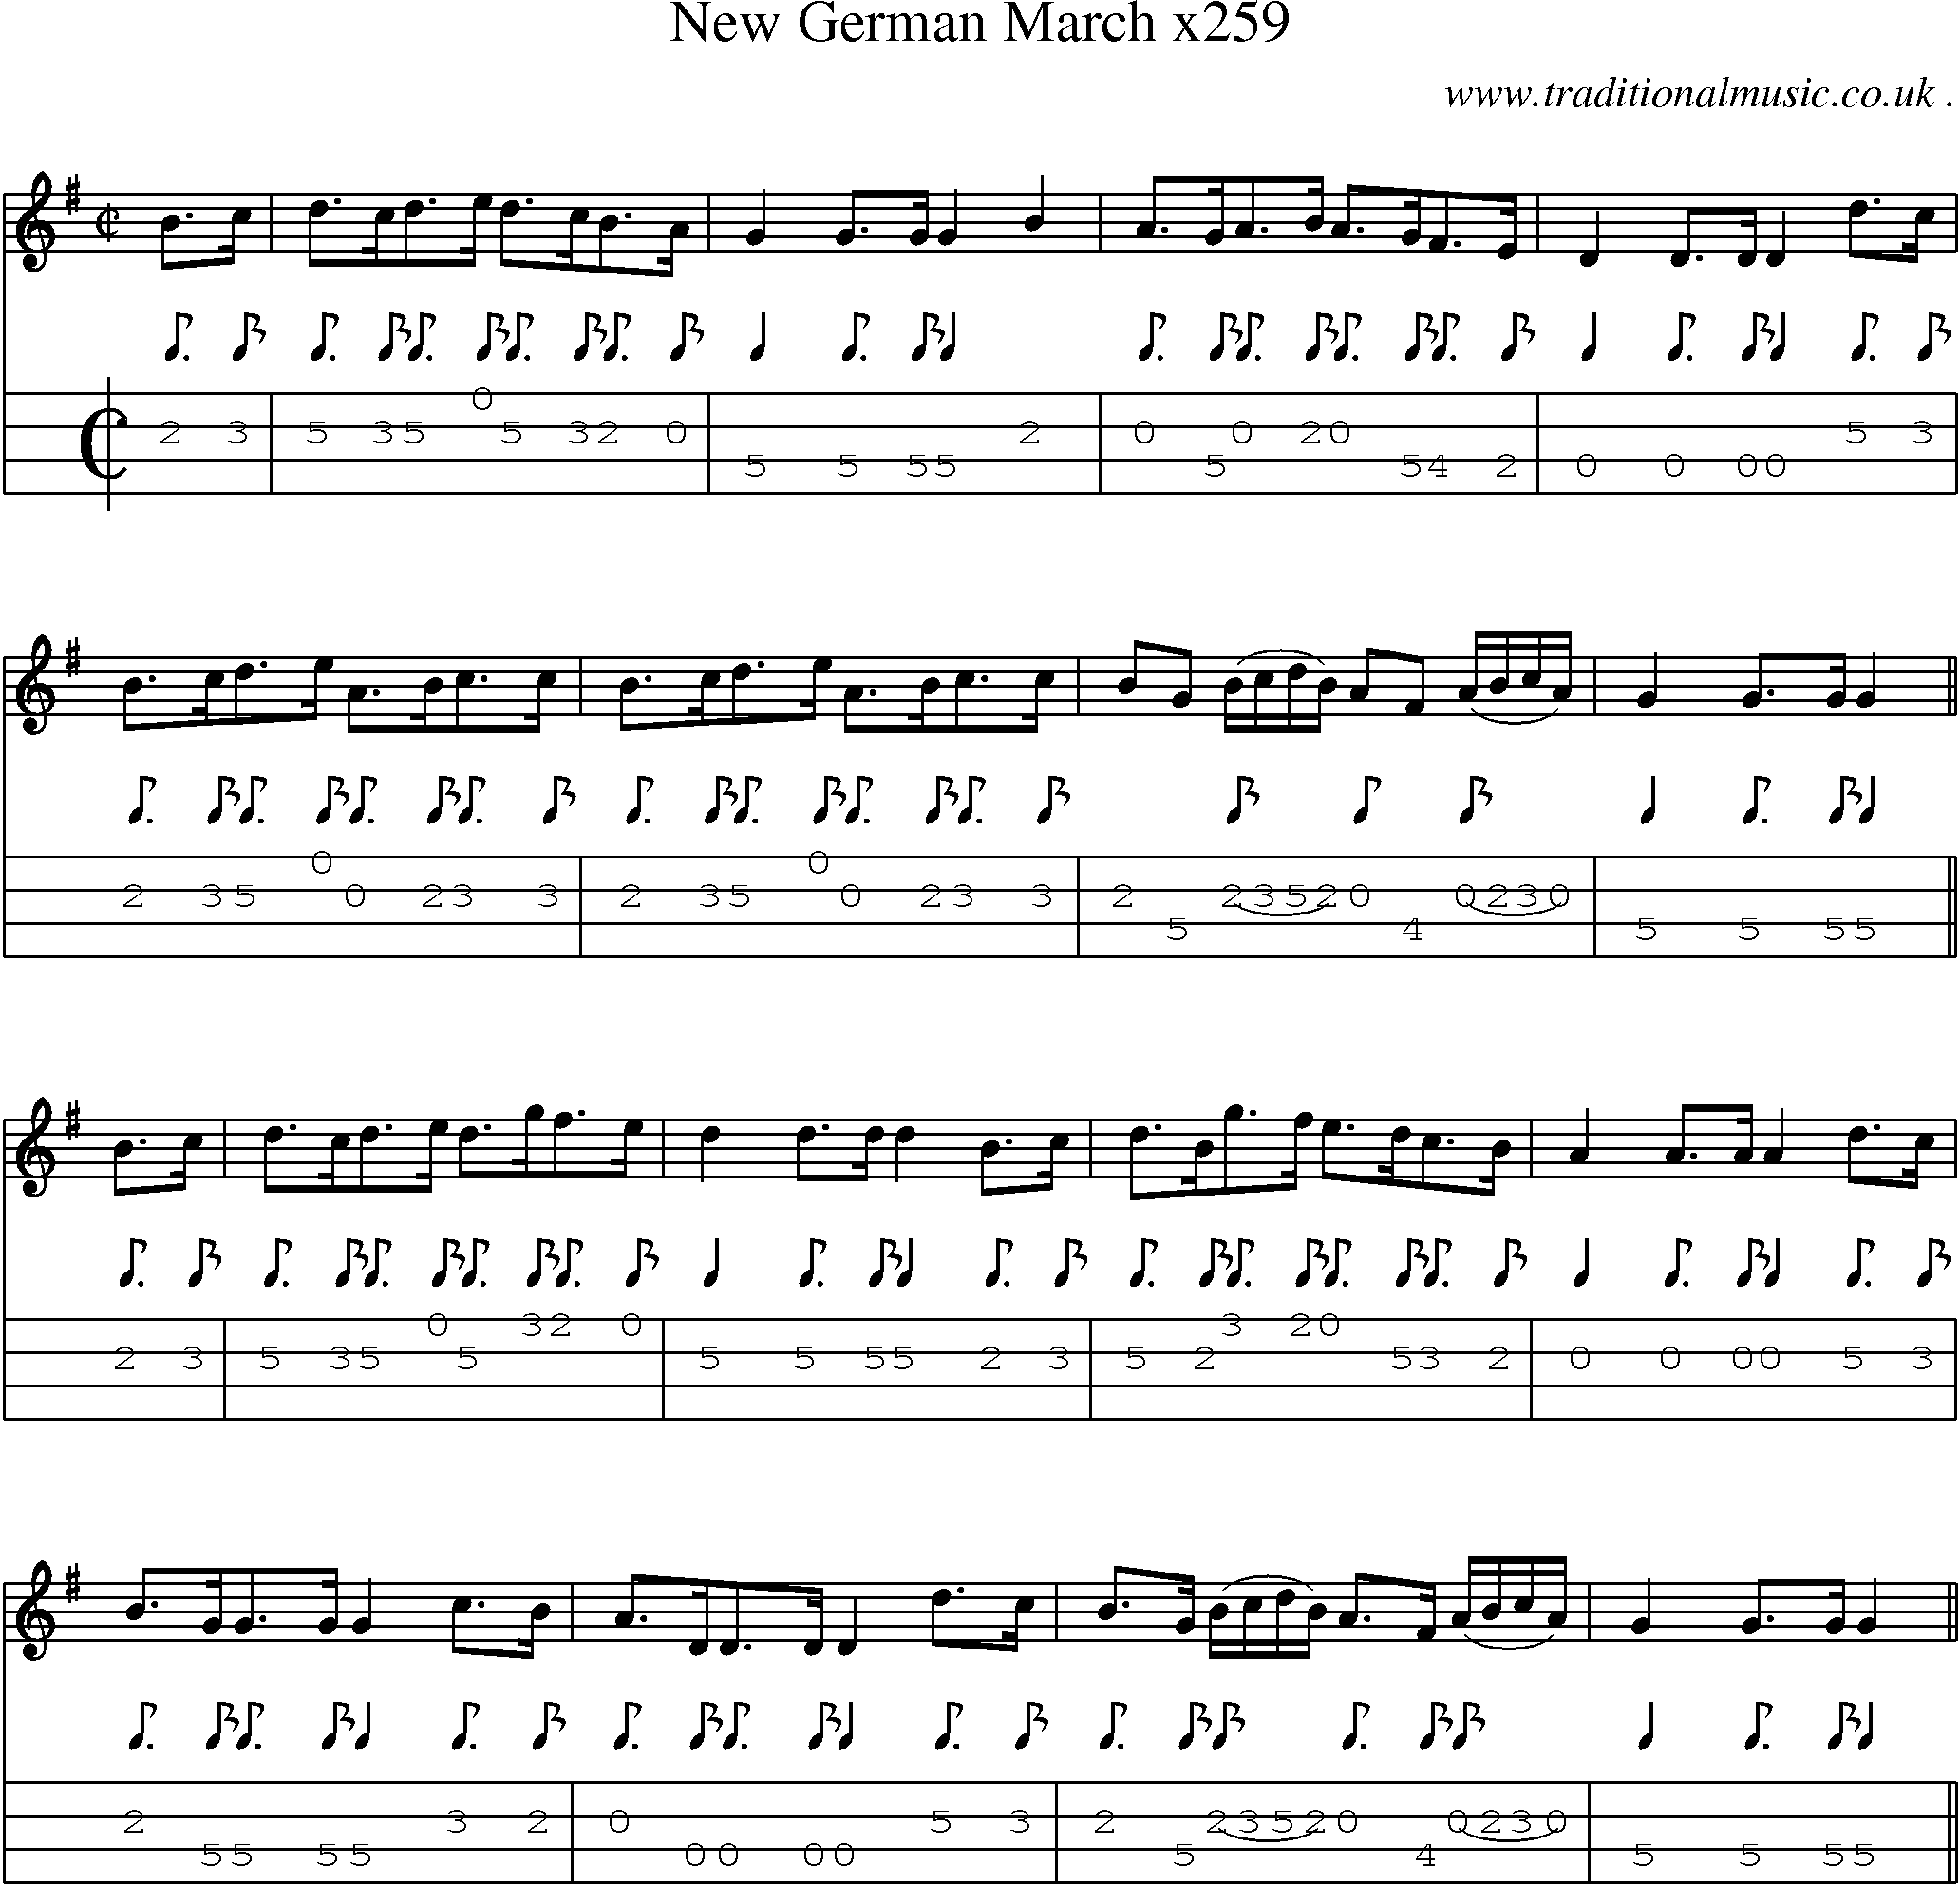 Sheet-Music and Mandolin Tabs for New German March X259